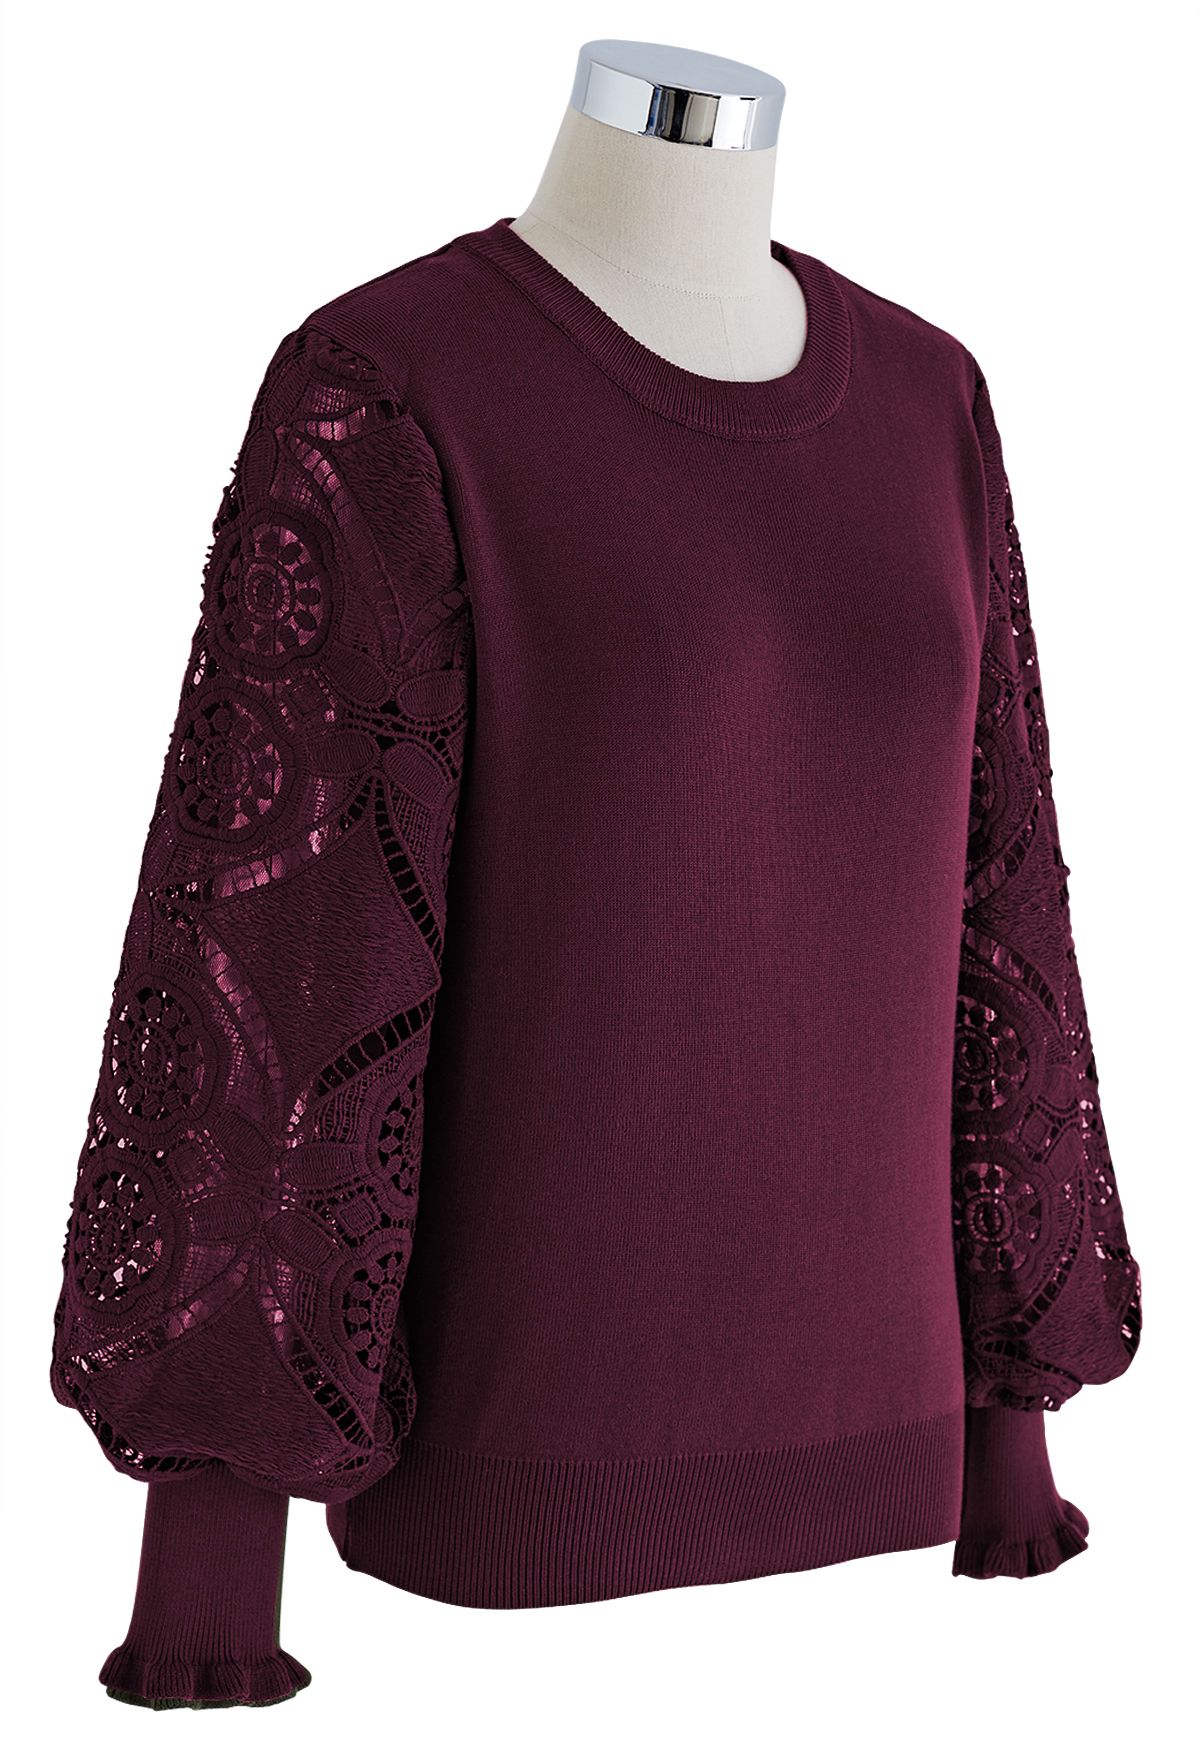 Floral Crochet Sleeve Knit Top in Burgundy